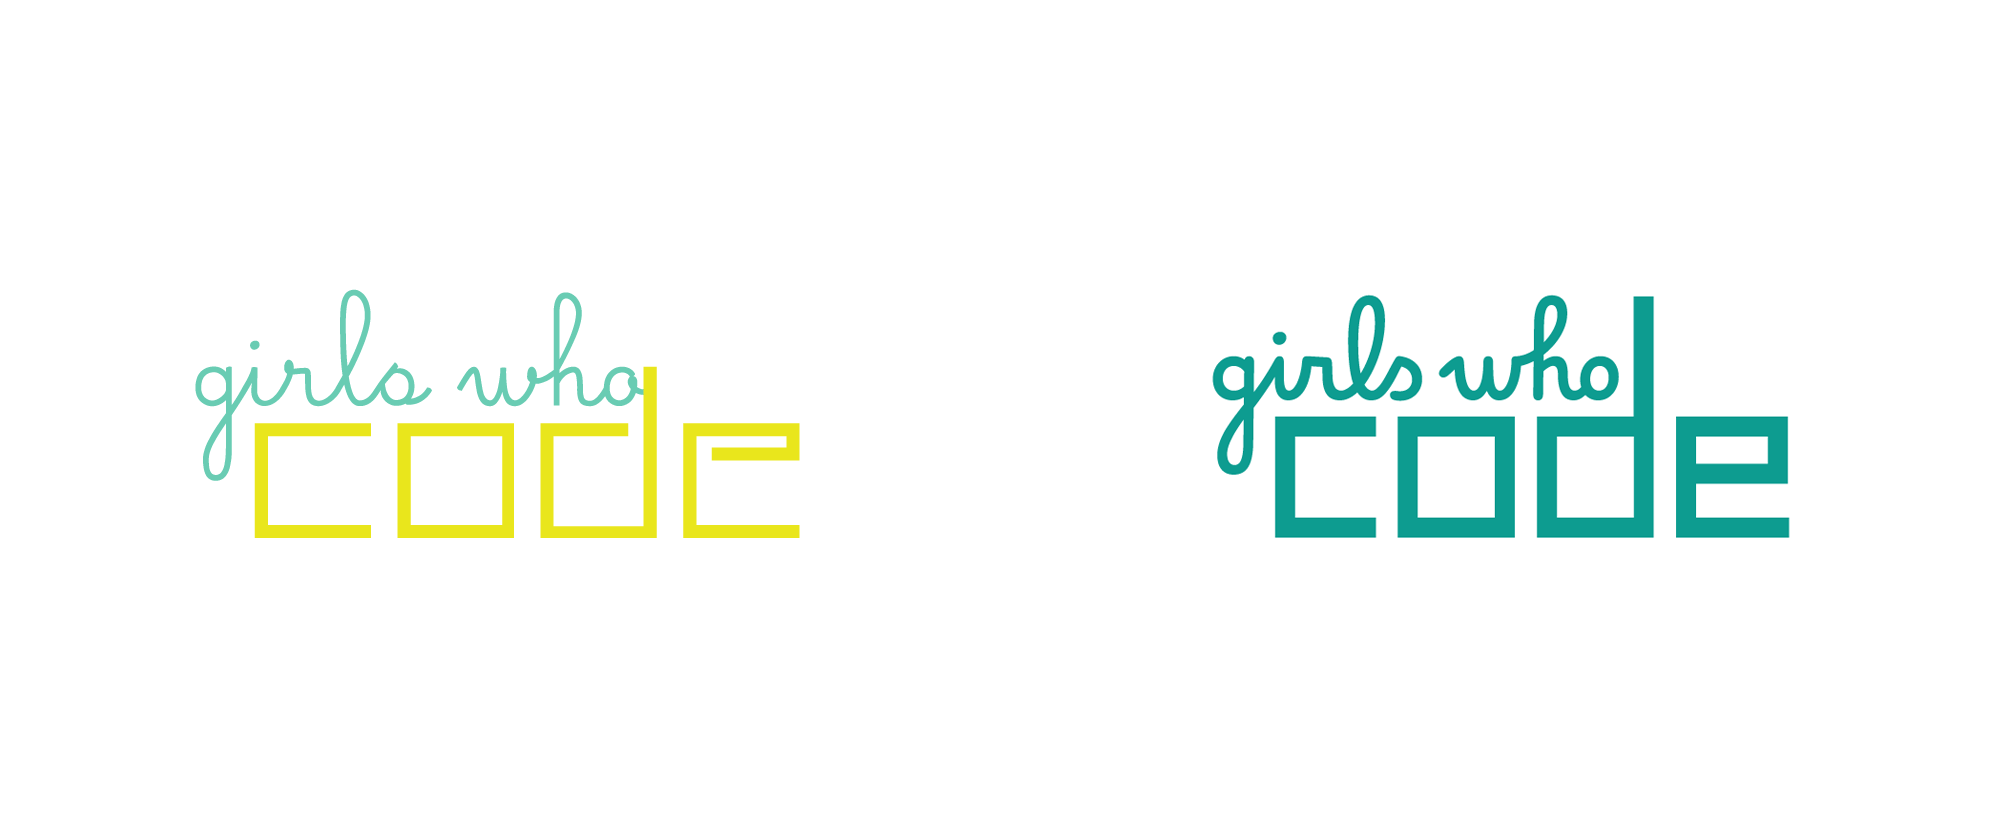 New Logo and Identity for Girls Who Code by Hyperakt